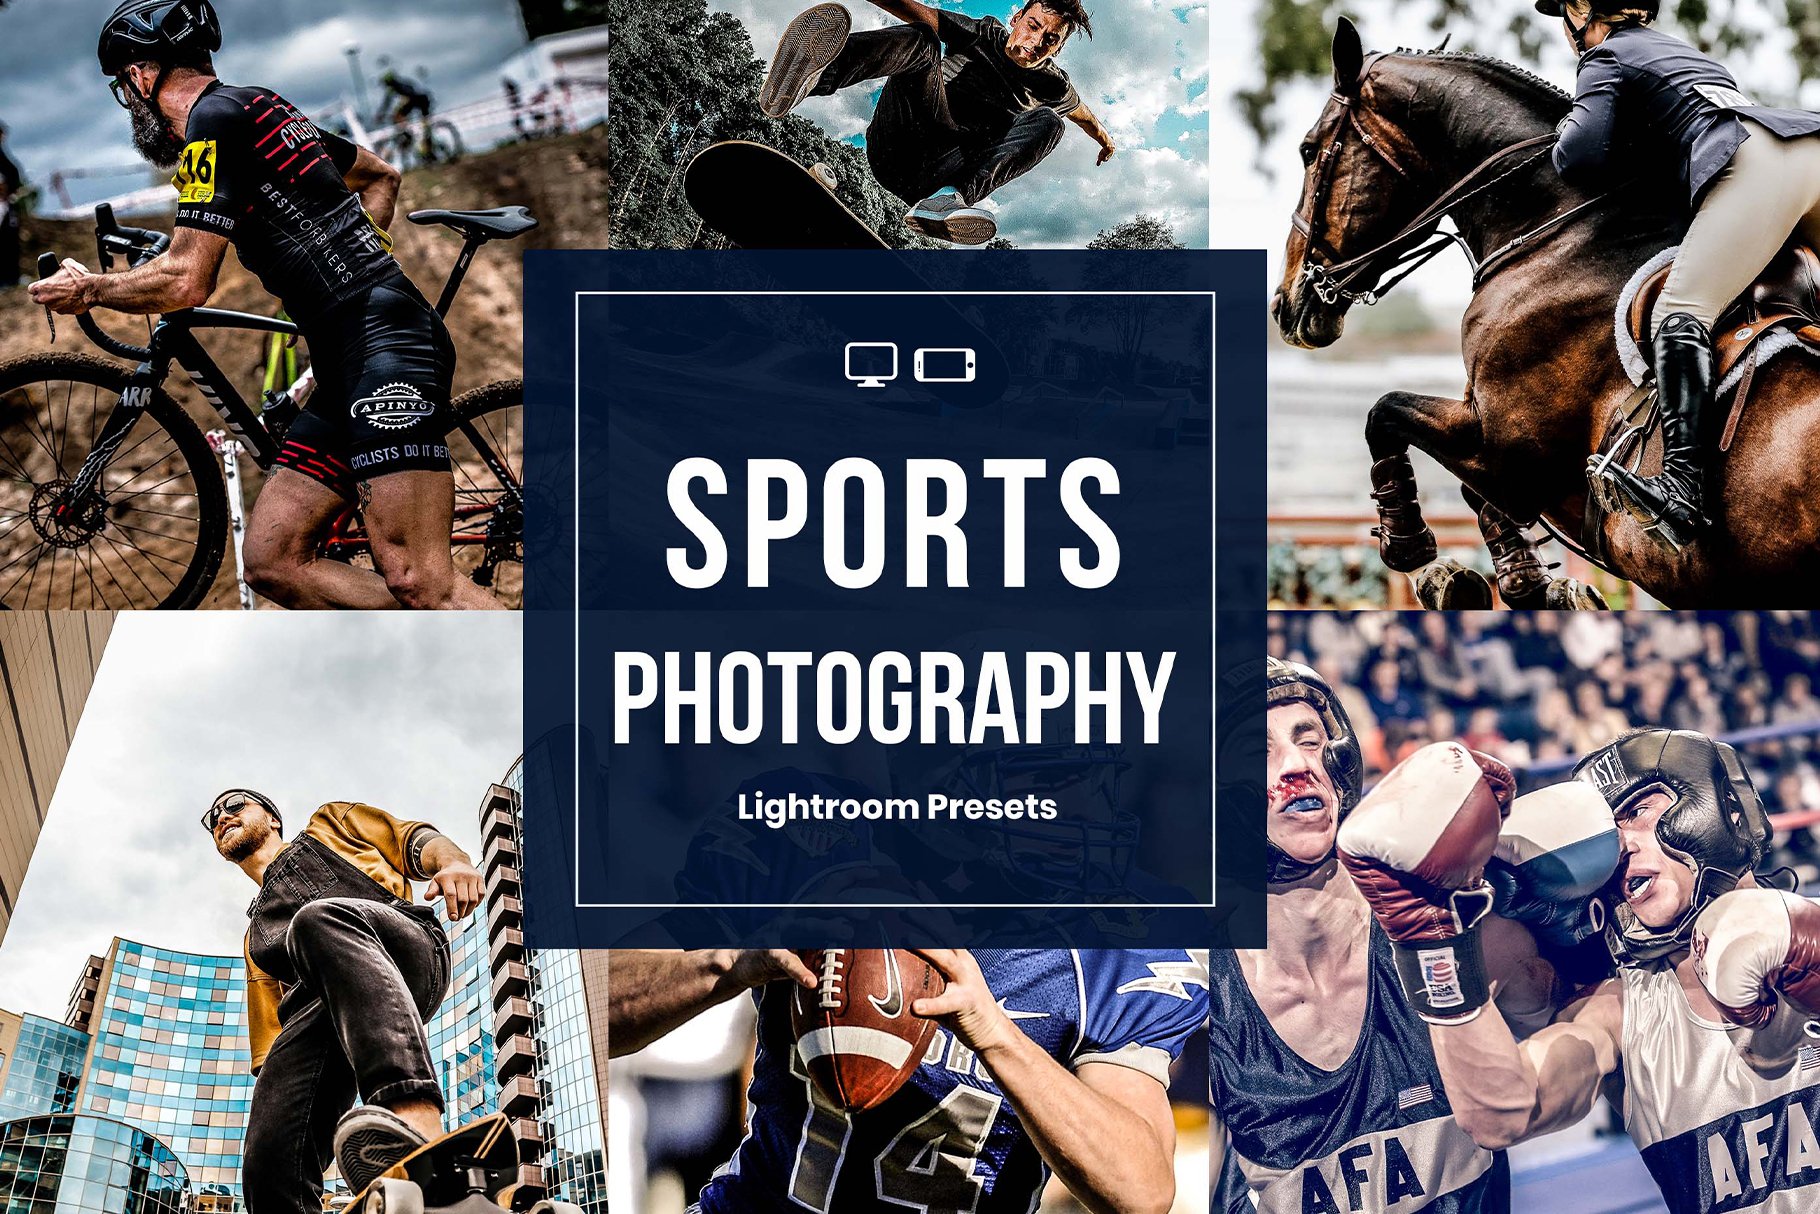 Sports Photography Lightroom Presetscover image.